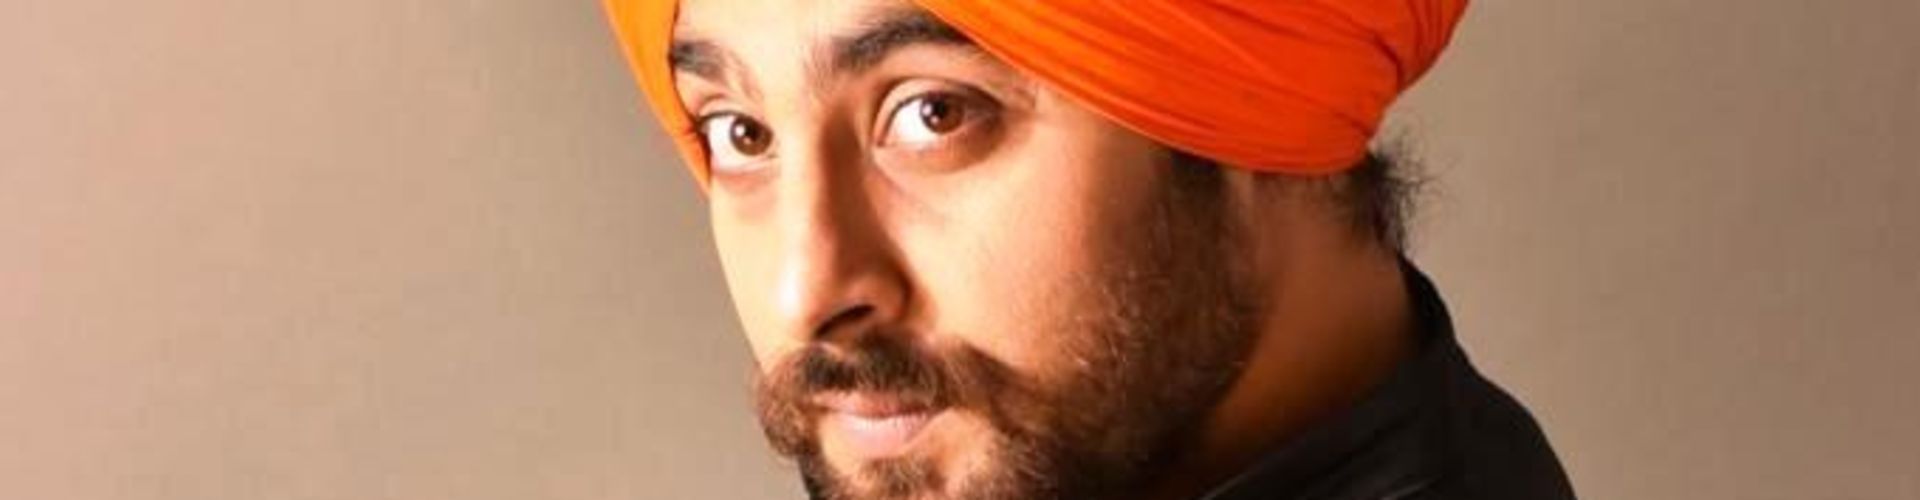 ​Reality Shows and Films, Both Are Equally Challenging Says Kanwalpreet Singh